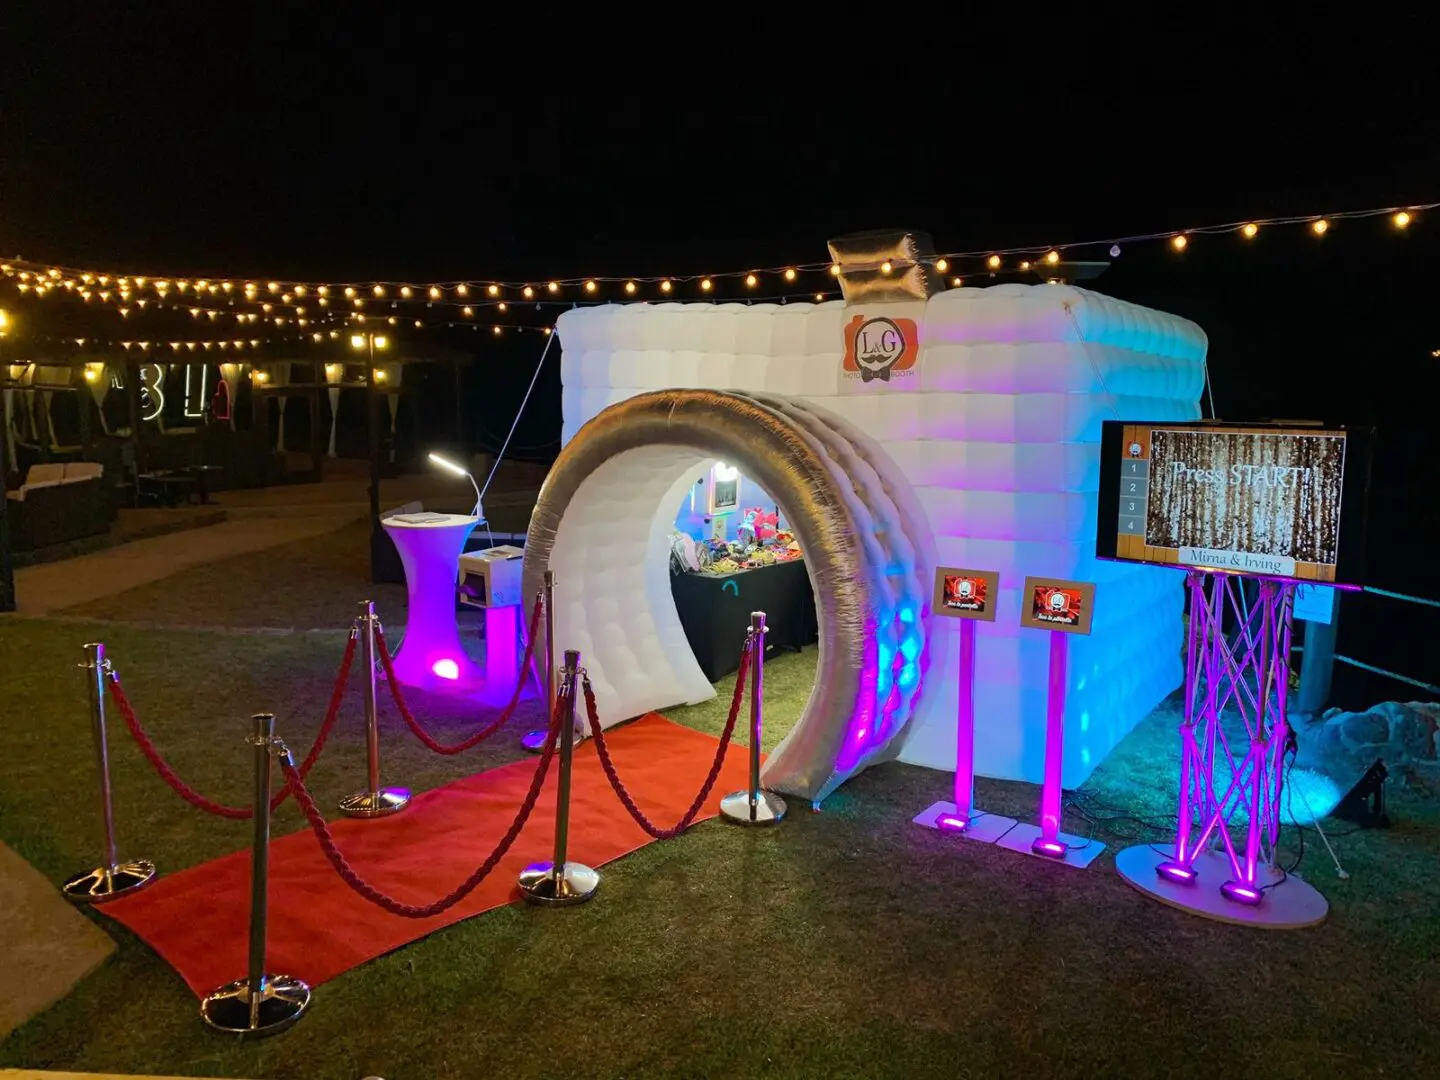 A photo booth set up in the shape of an arch.